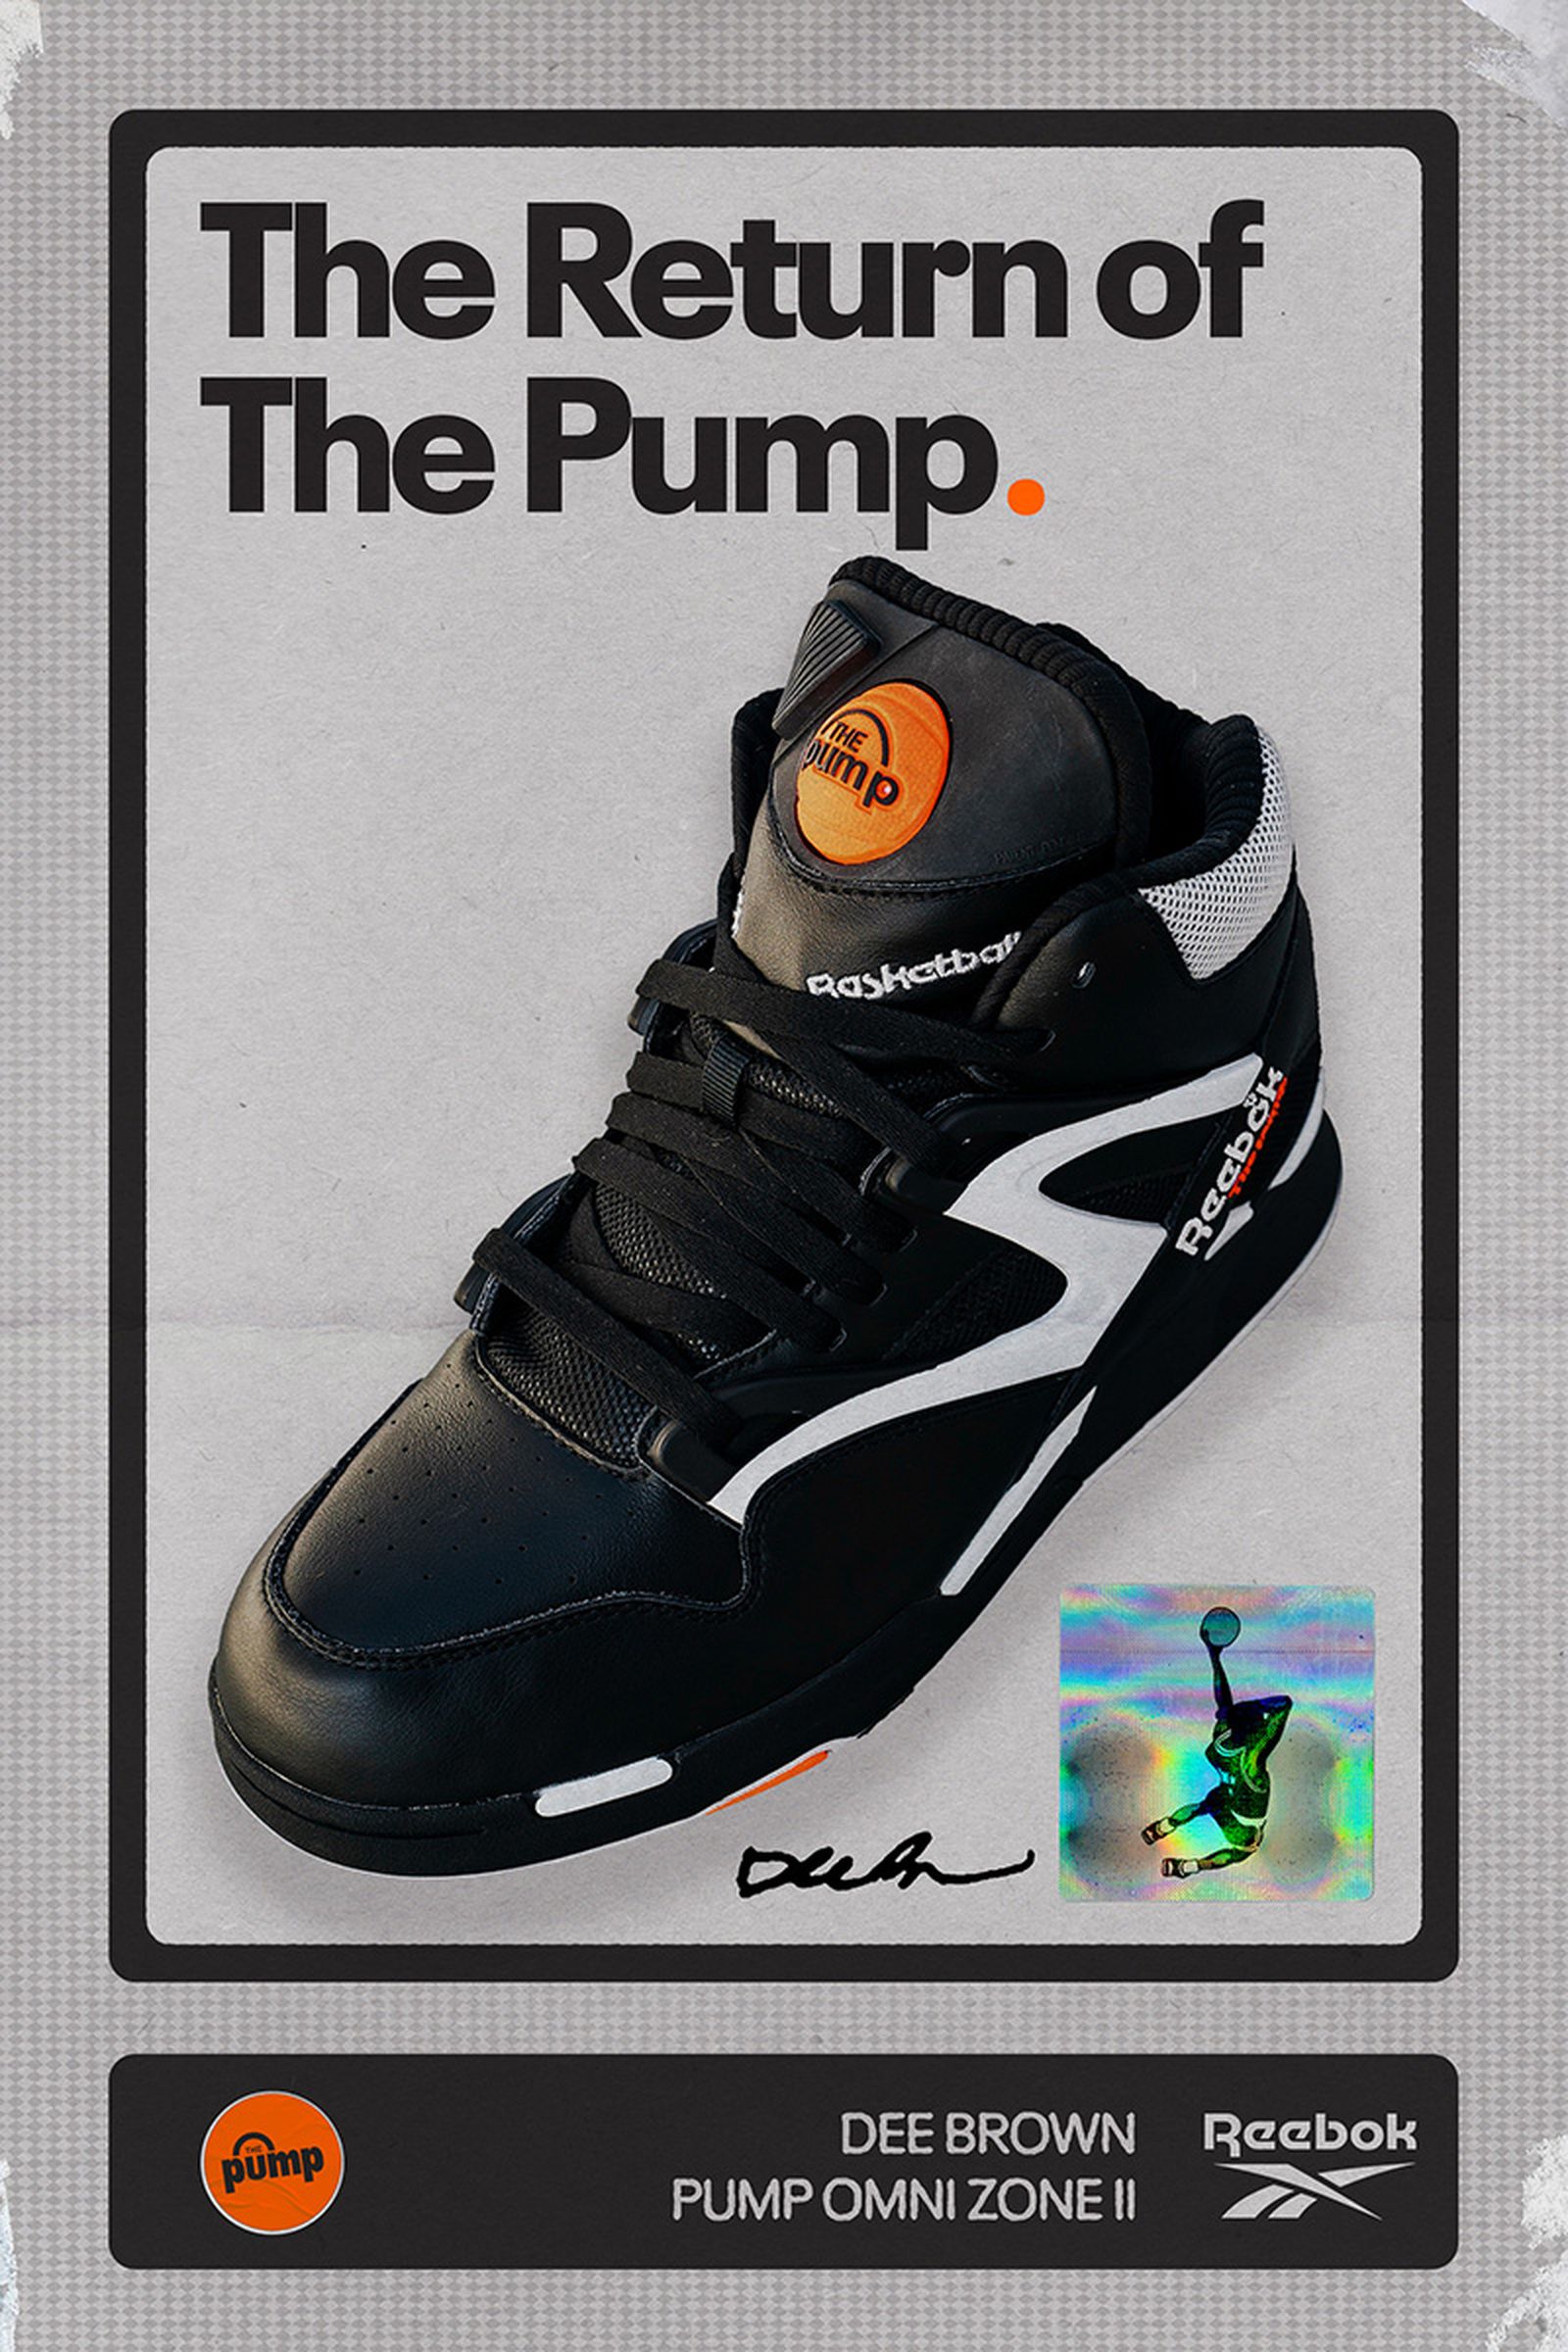 What Year Did the Reebok Pumps Come Out?